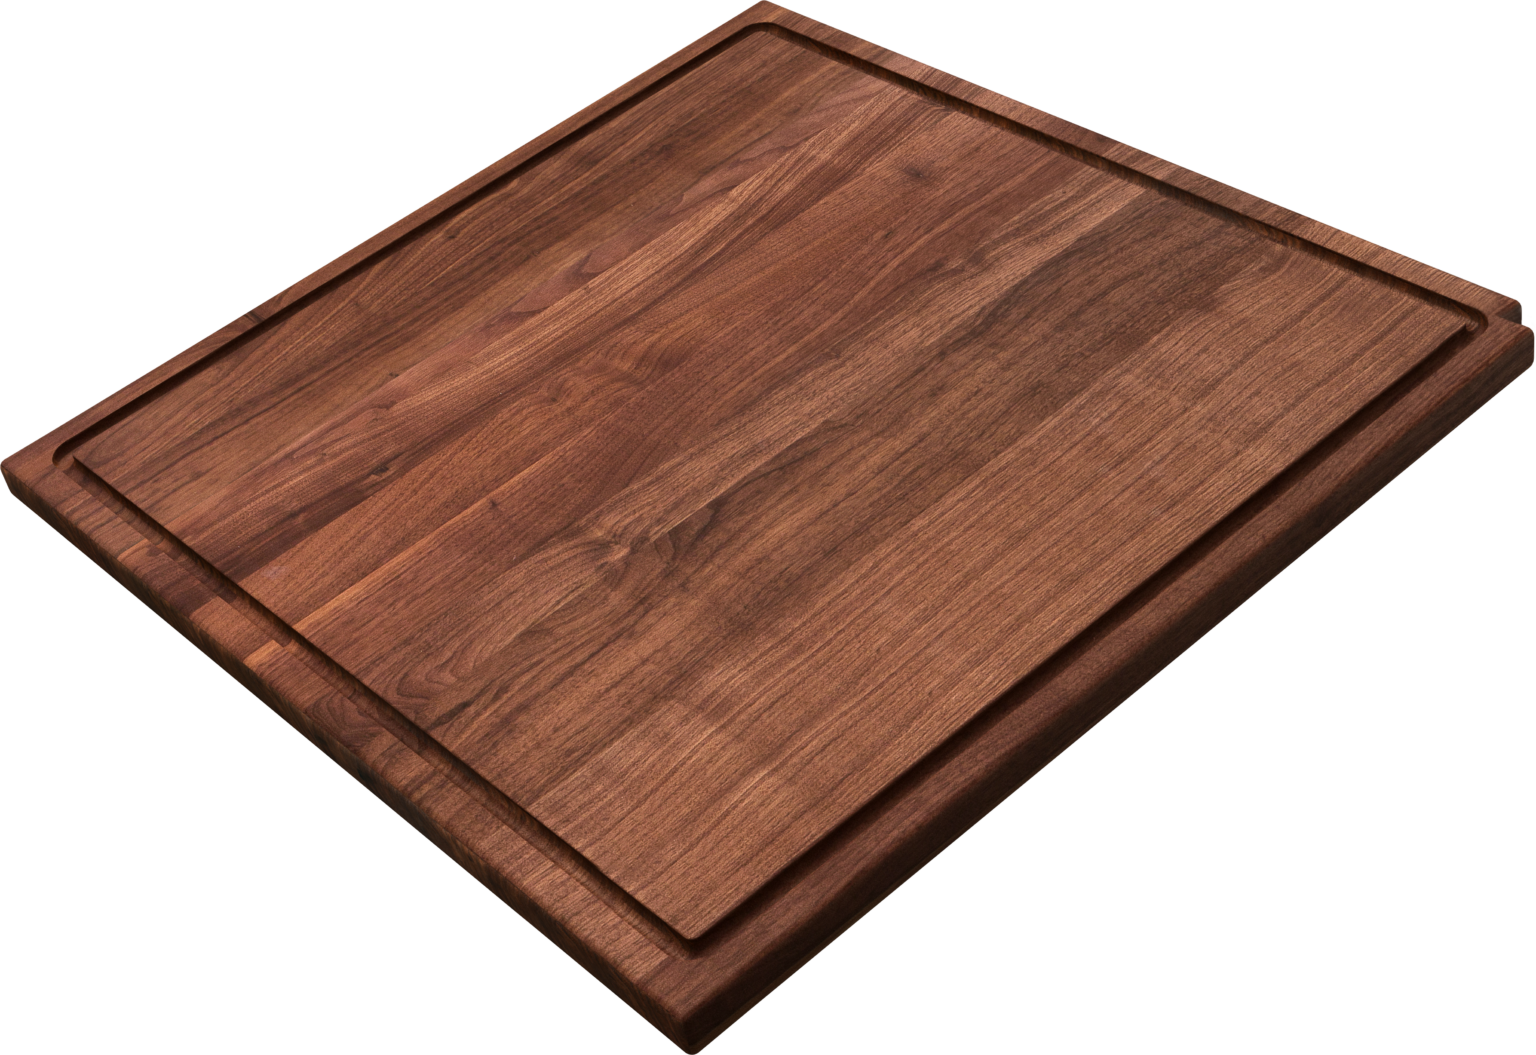 The Galley Upper Tier Corner Cutting Board 18-1/4" x 18-1/4" with Juice Groove on one side